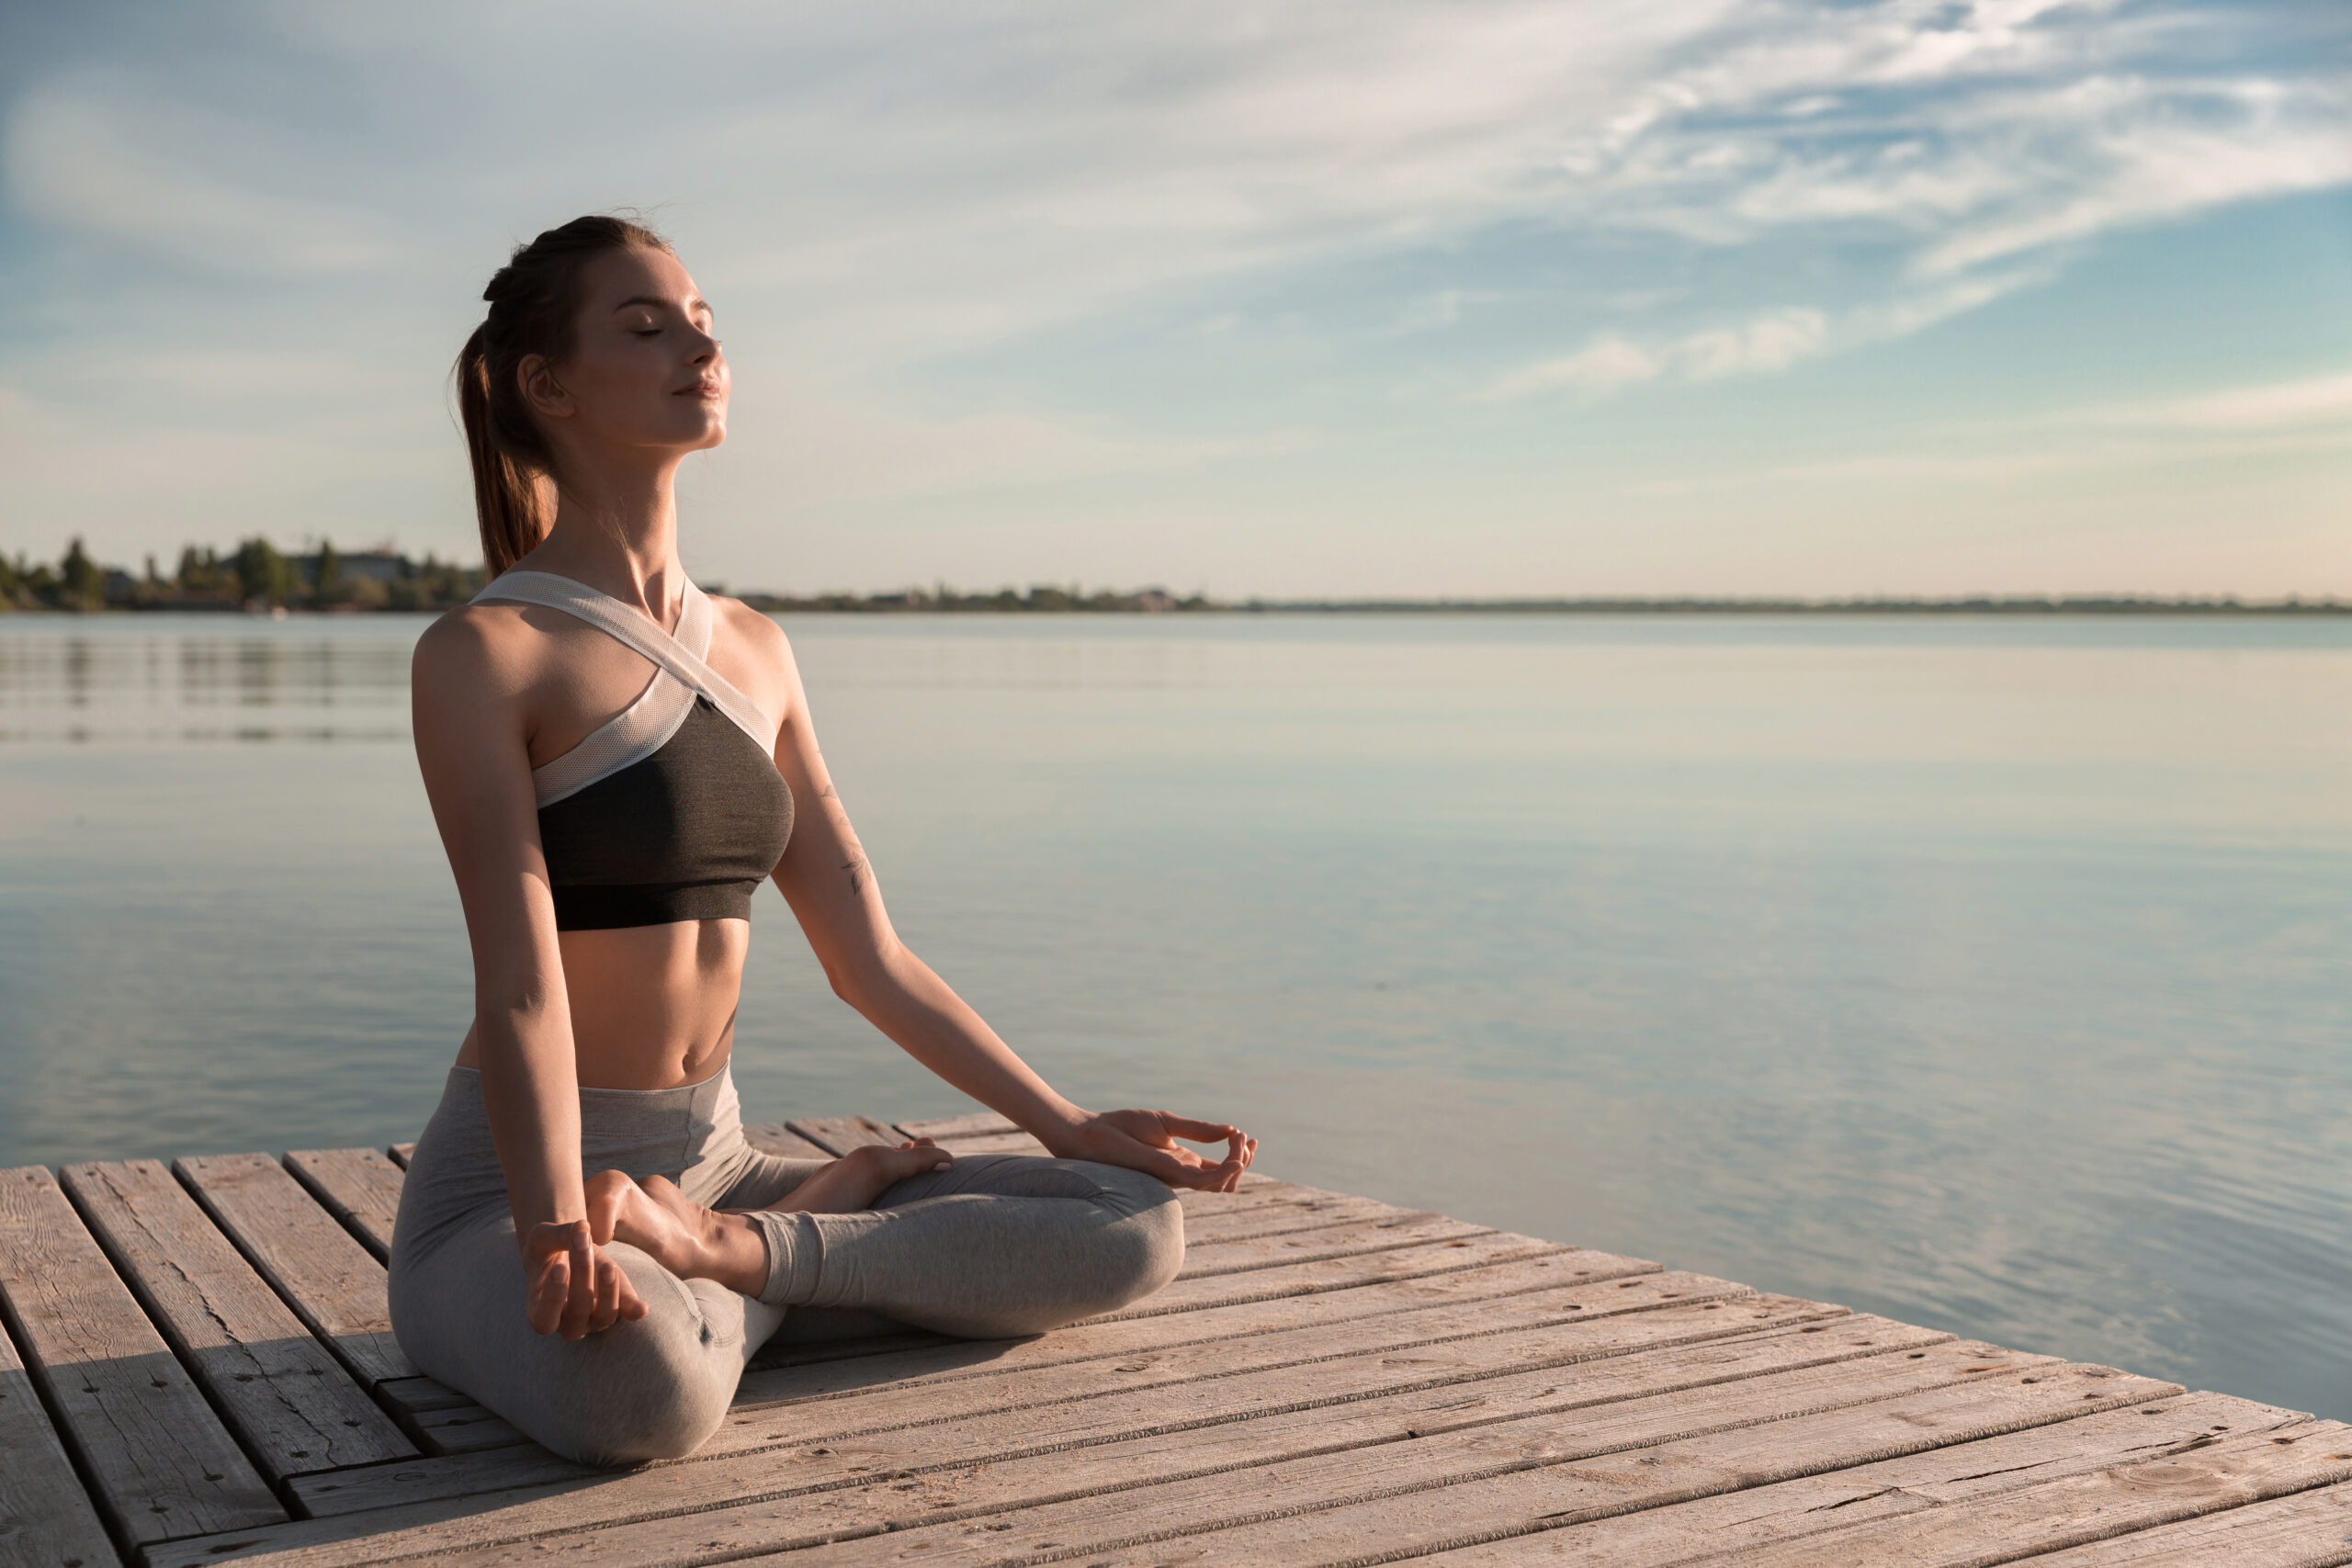 storyblocks-image-of-young-sports-lady-at-the-beach-make-meditation-exercises_rAnSBnpcZ-scaled Ditch the Fad Diets: 5 Proven Ways to Lose Weight Safely